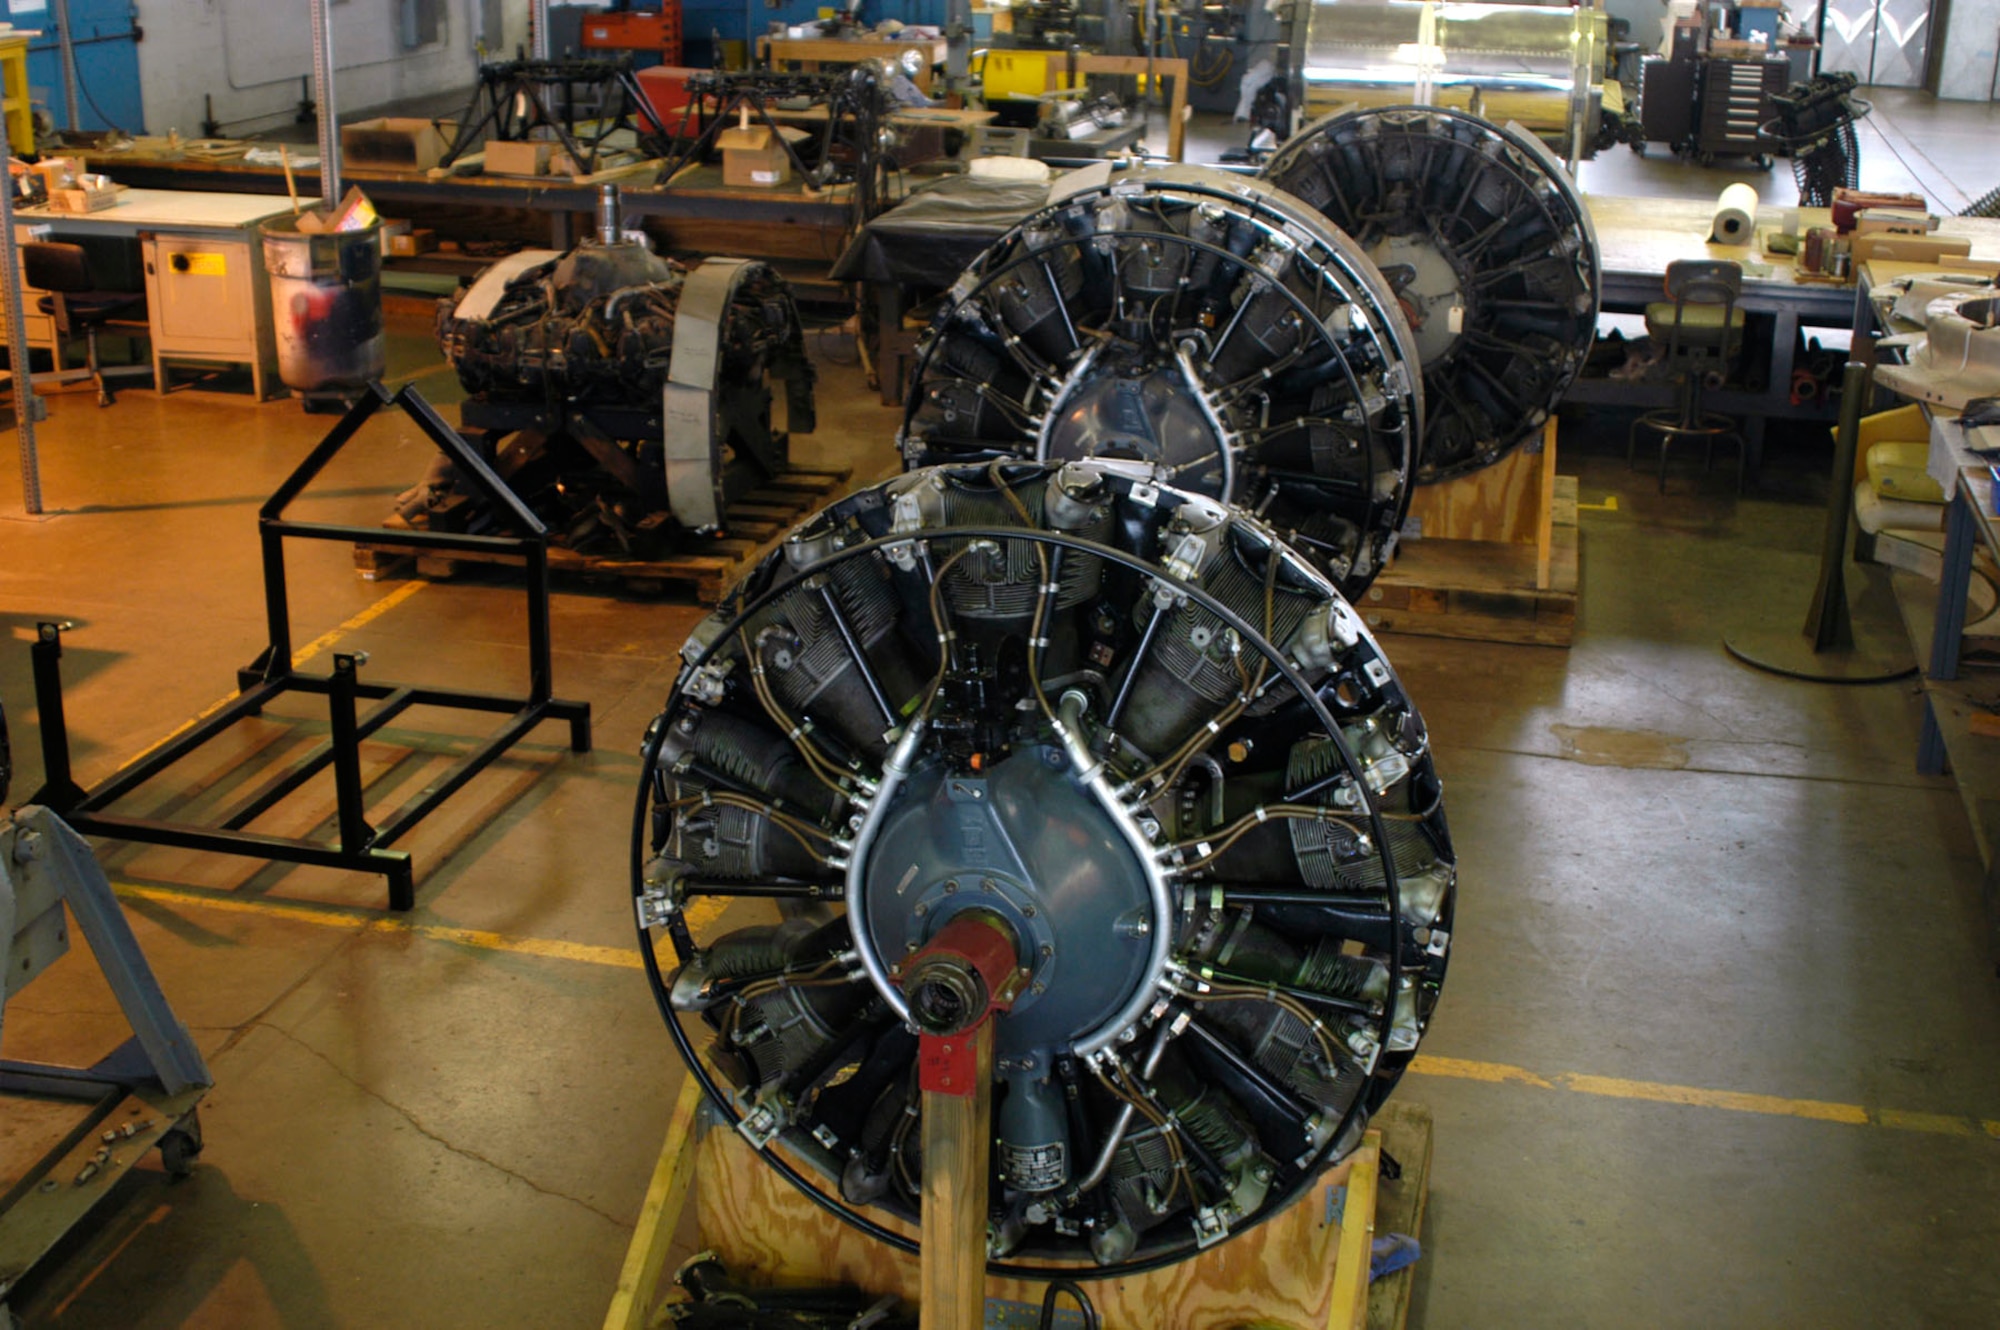 DAYTON, Ohio (10/2007) -- Wright R-1820-97 turbosupercharged radial engines from the B-17F "Memphis Belle." These engines are in the restoration hangar at the National Museum of the U.S. Air Force. (U.S. Air Force photo)